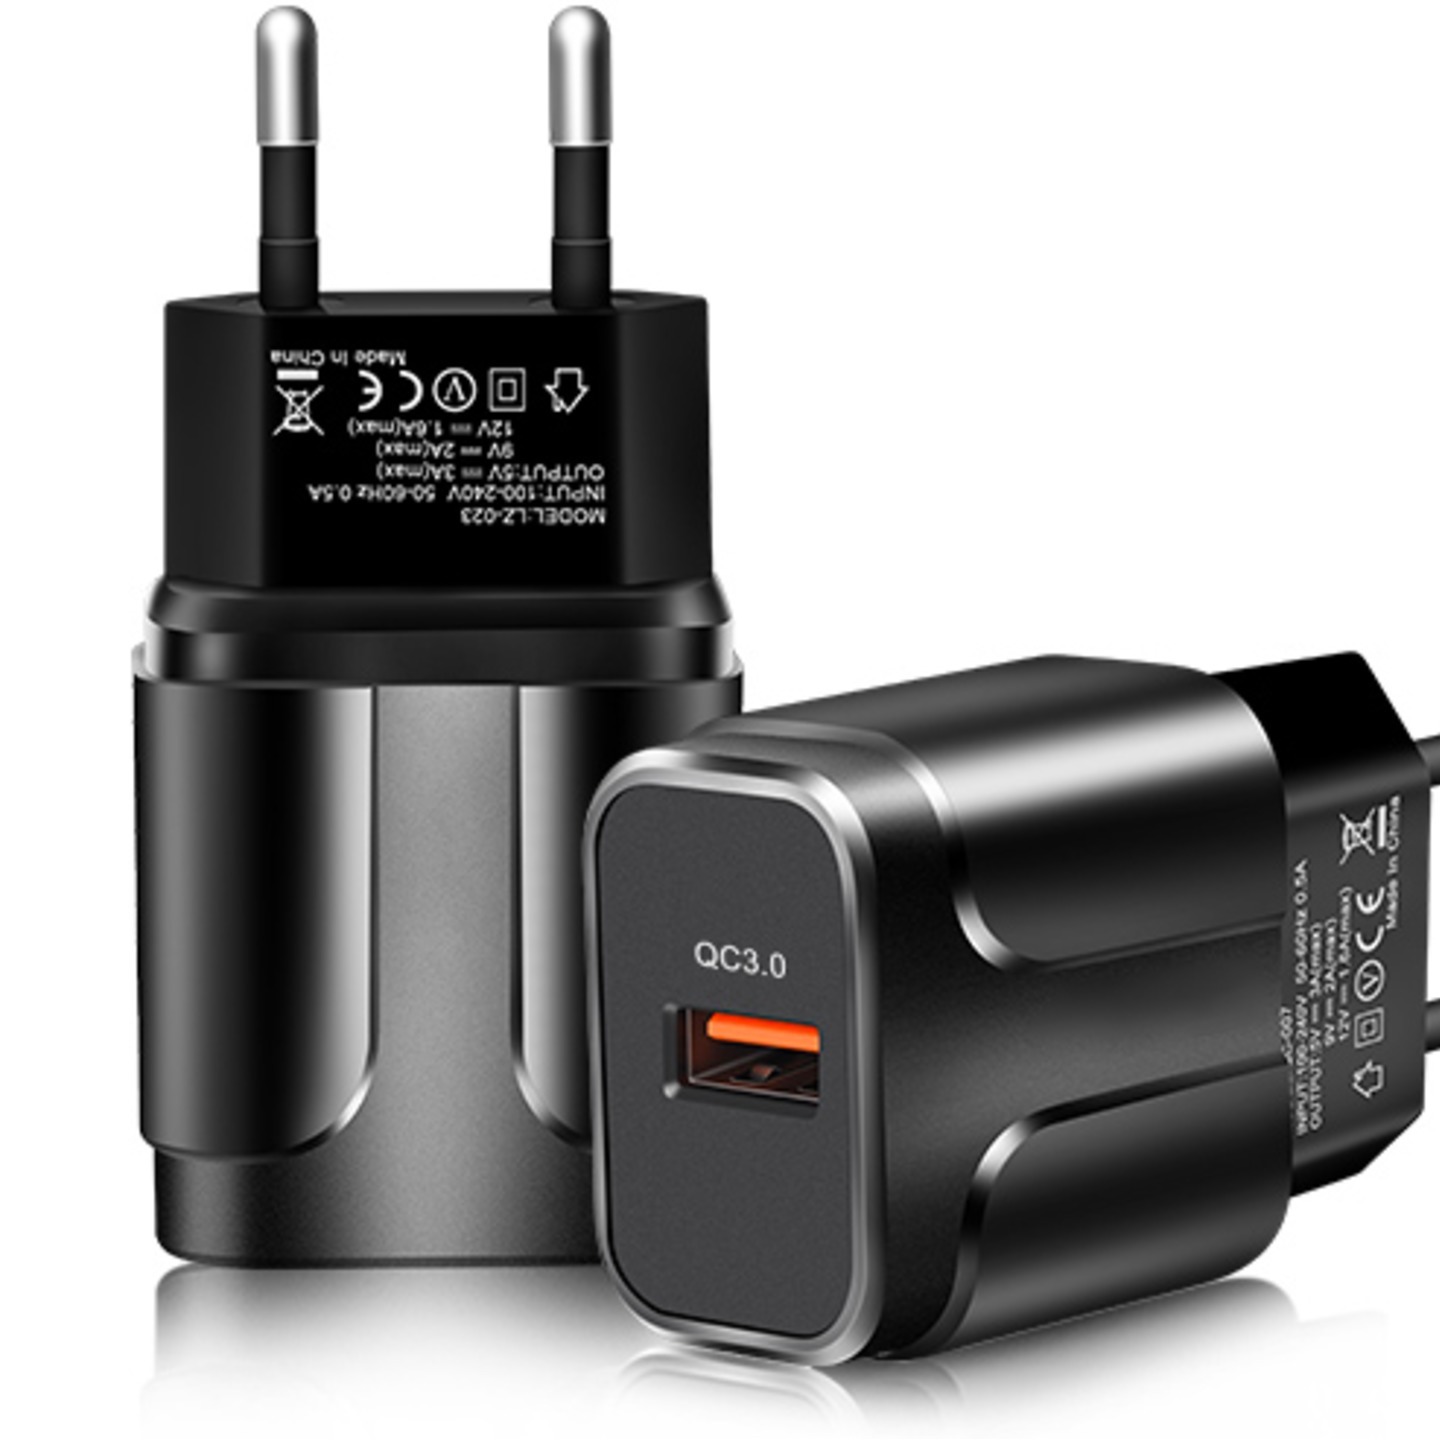 USB Quick Charger QC3.0 18W for Phones and Tablets